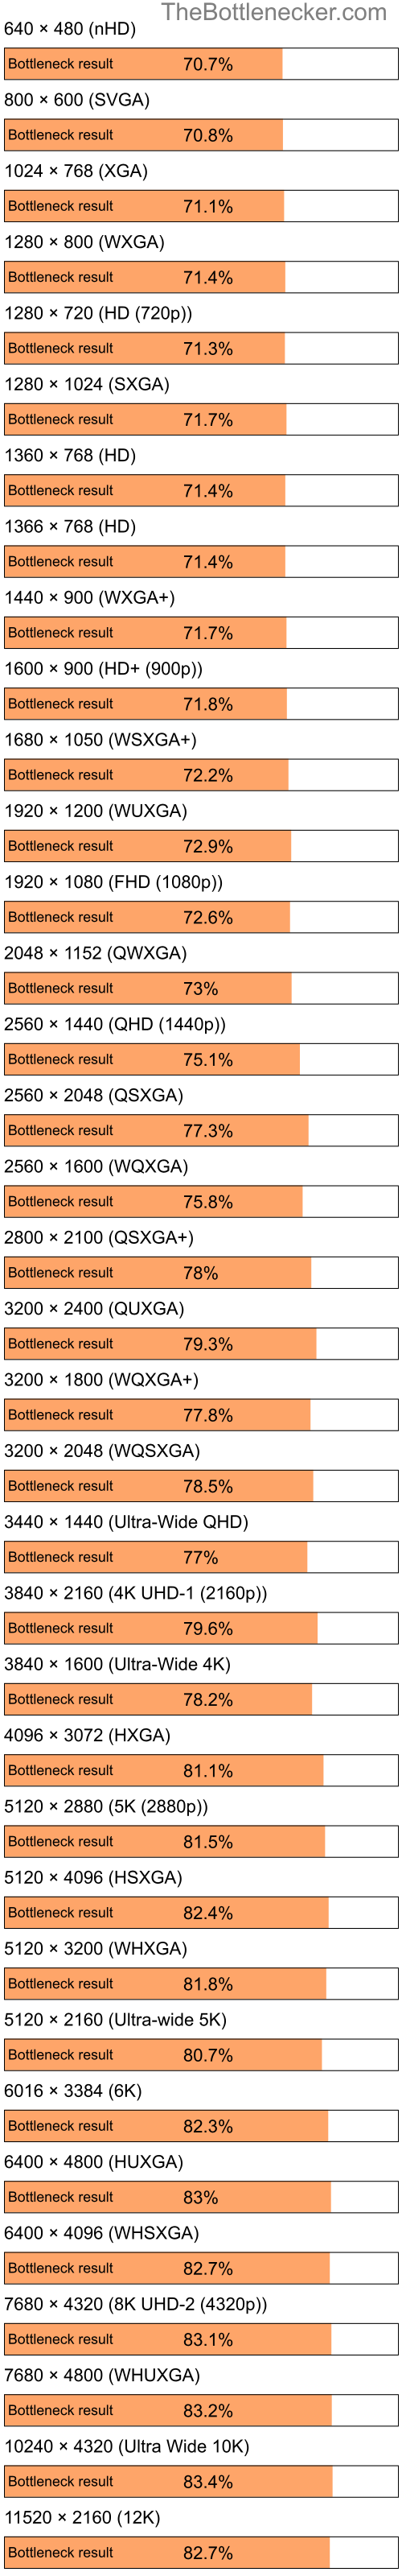 Bottleneck results by resolution for Intel Pentium 4 and NVIDIA Quadro NVS 135M in General Tasks